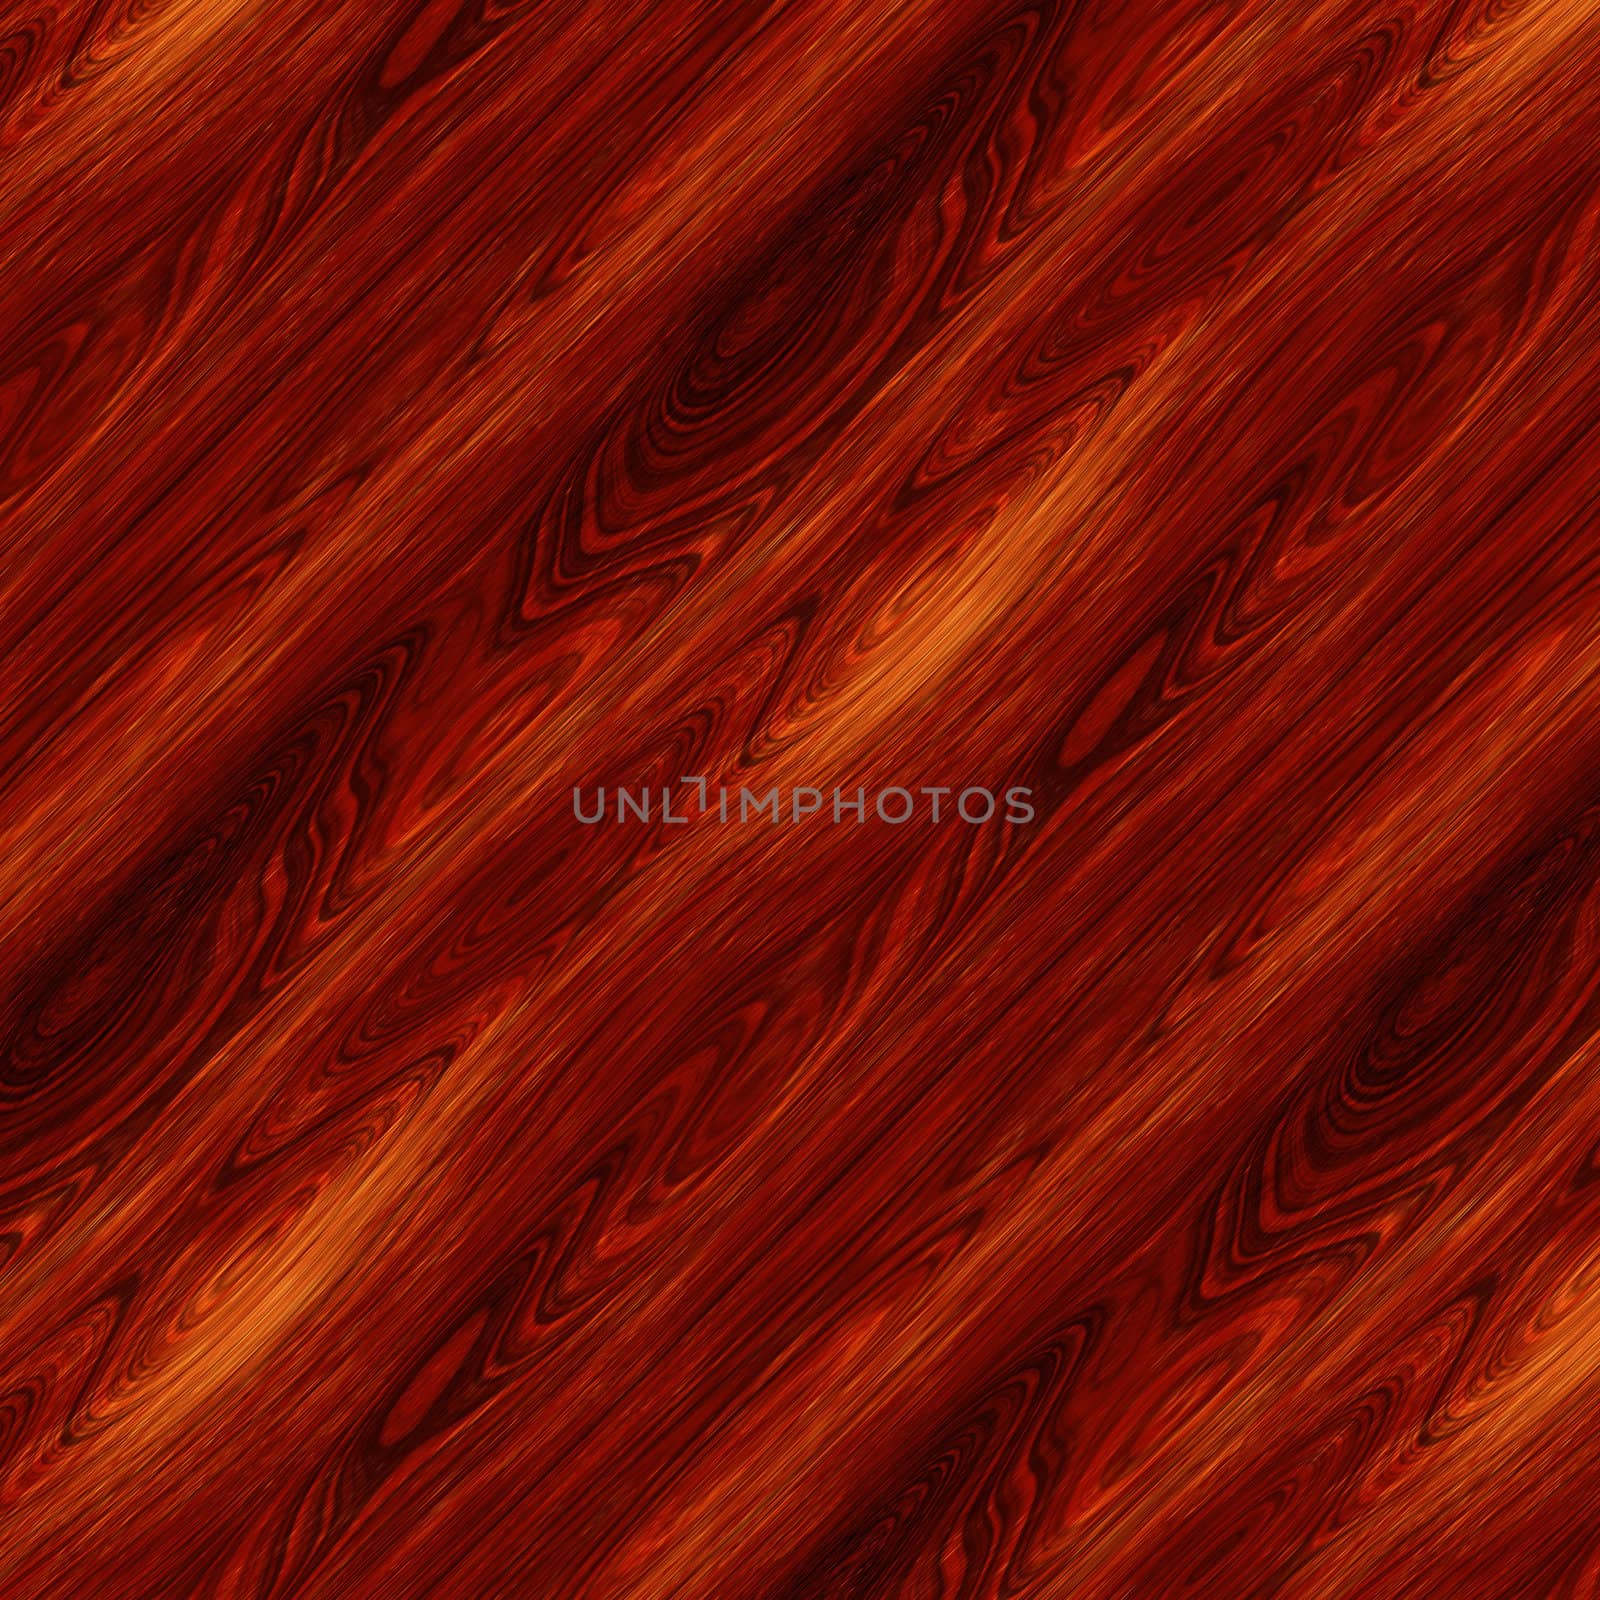 An image of a beautiful red wood background